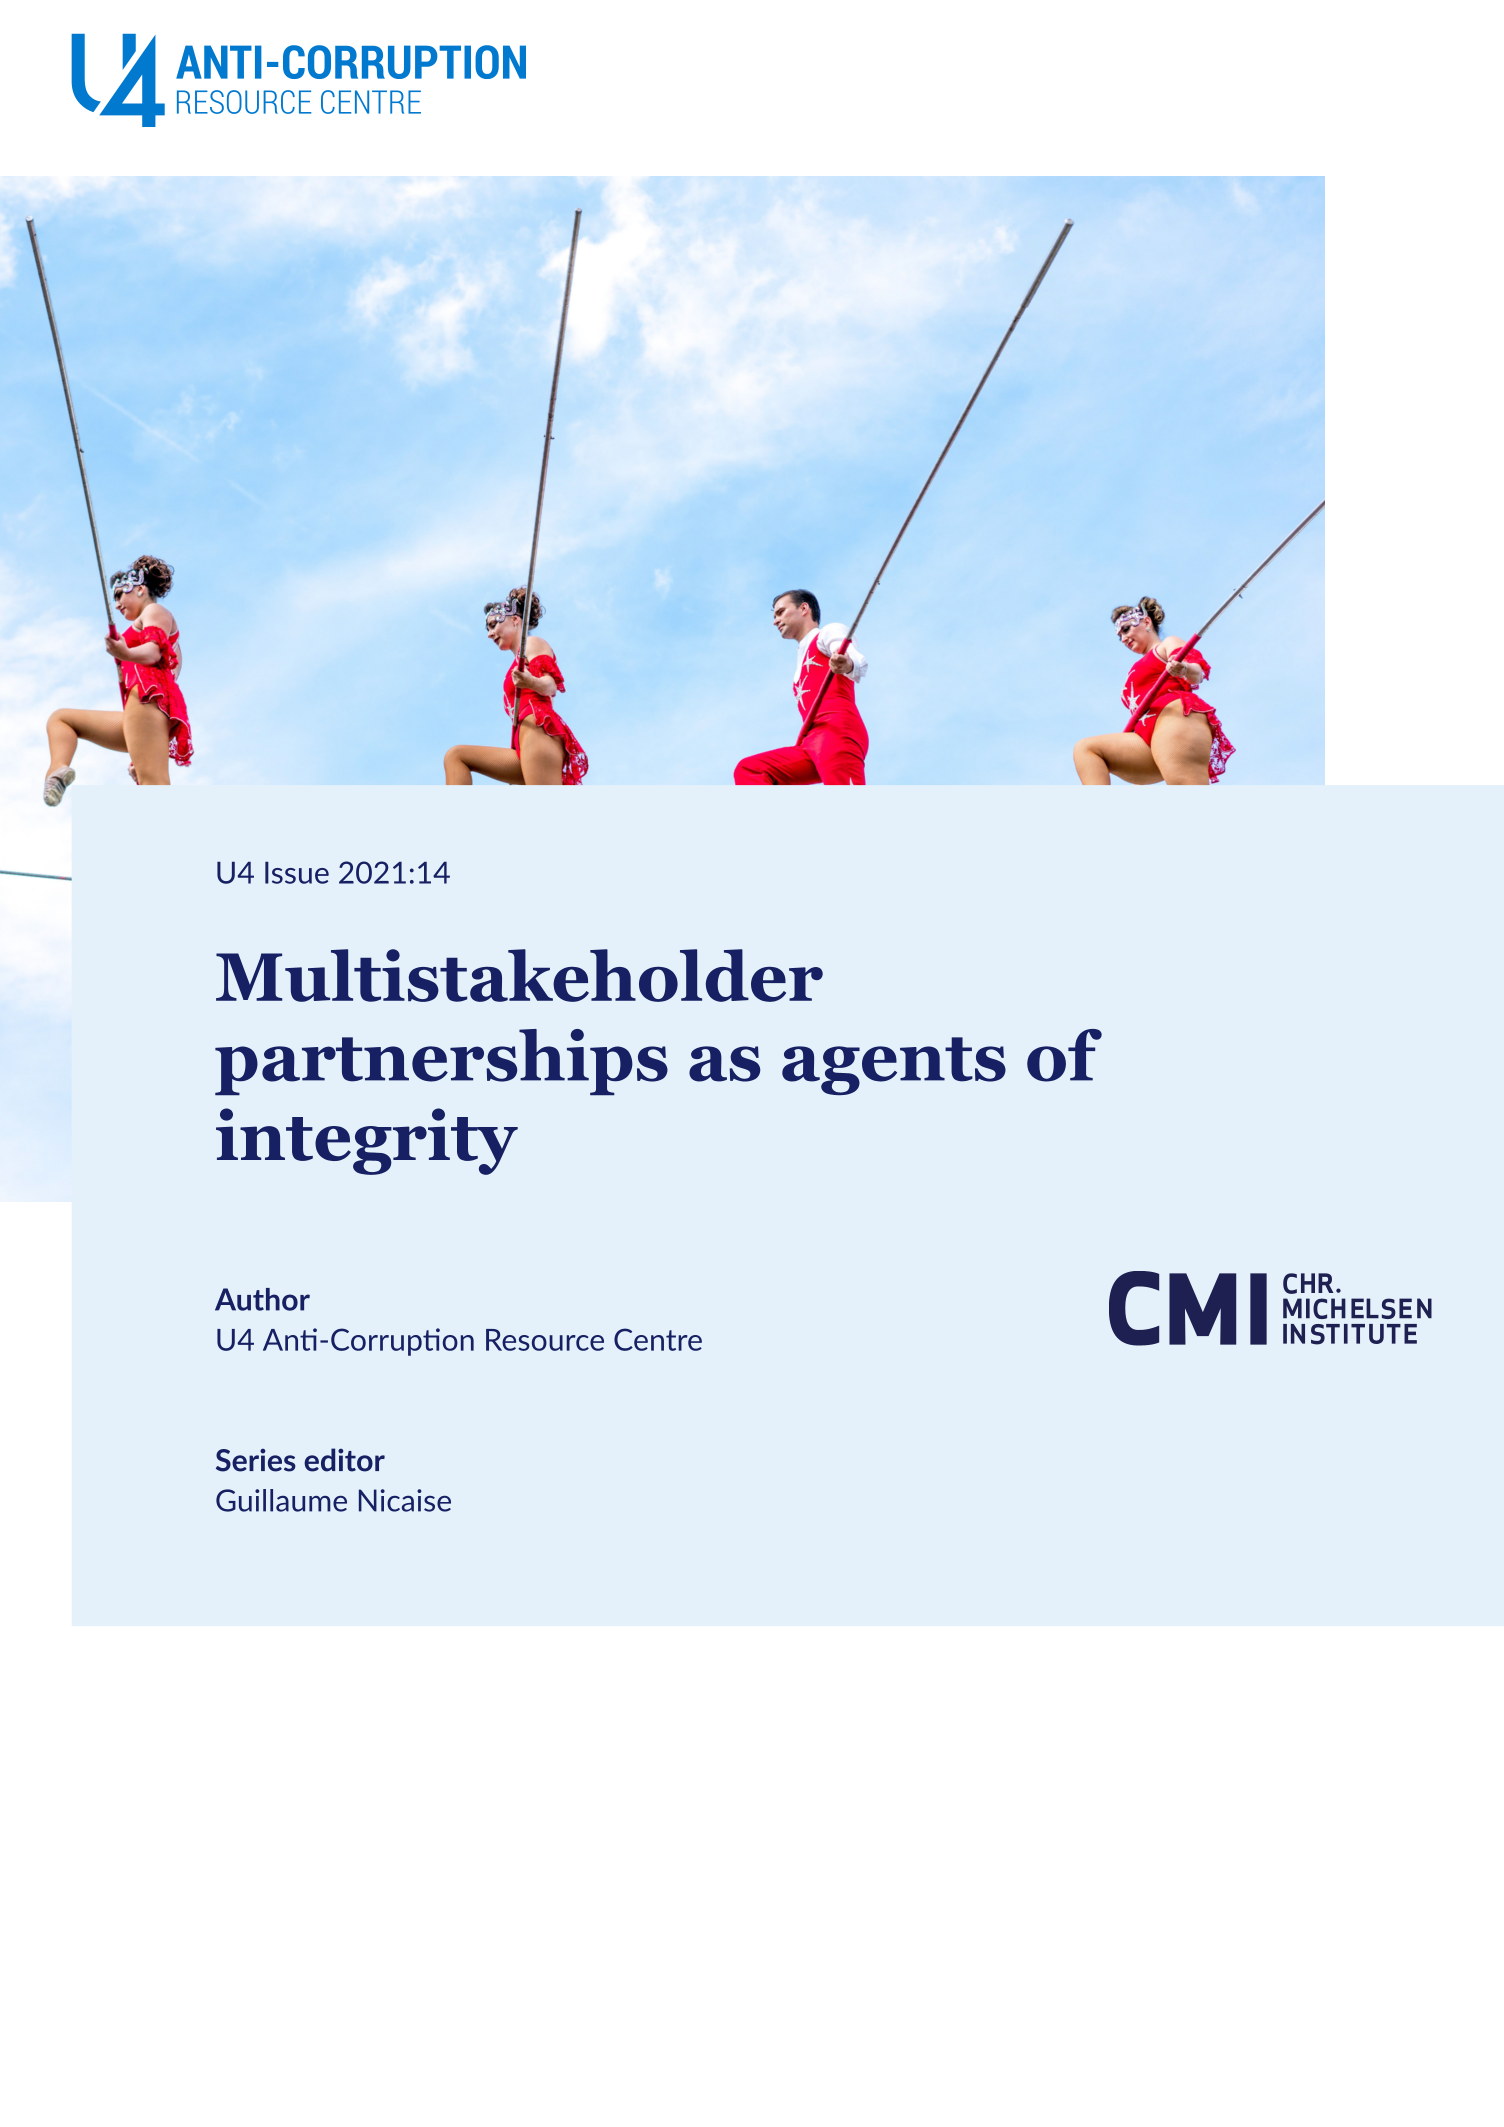 Multistakeholder partnerships as agents of integrity